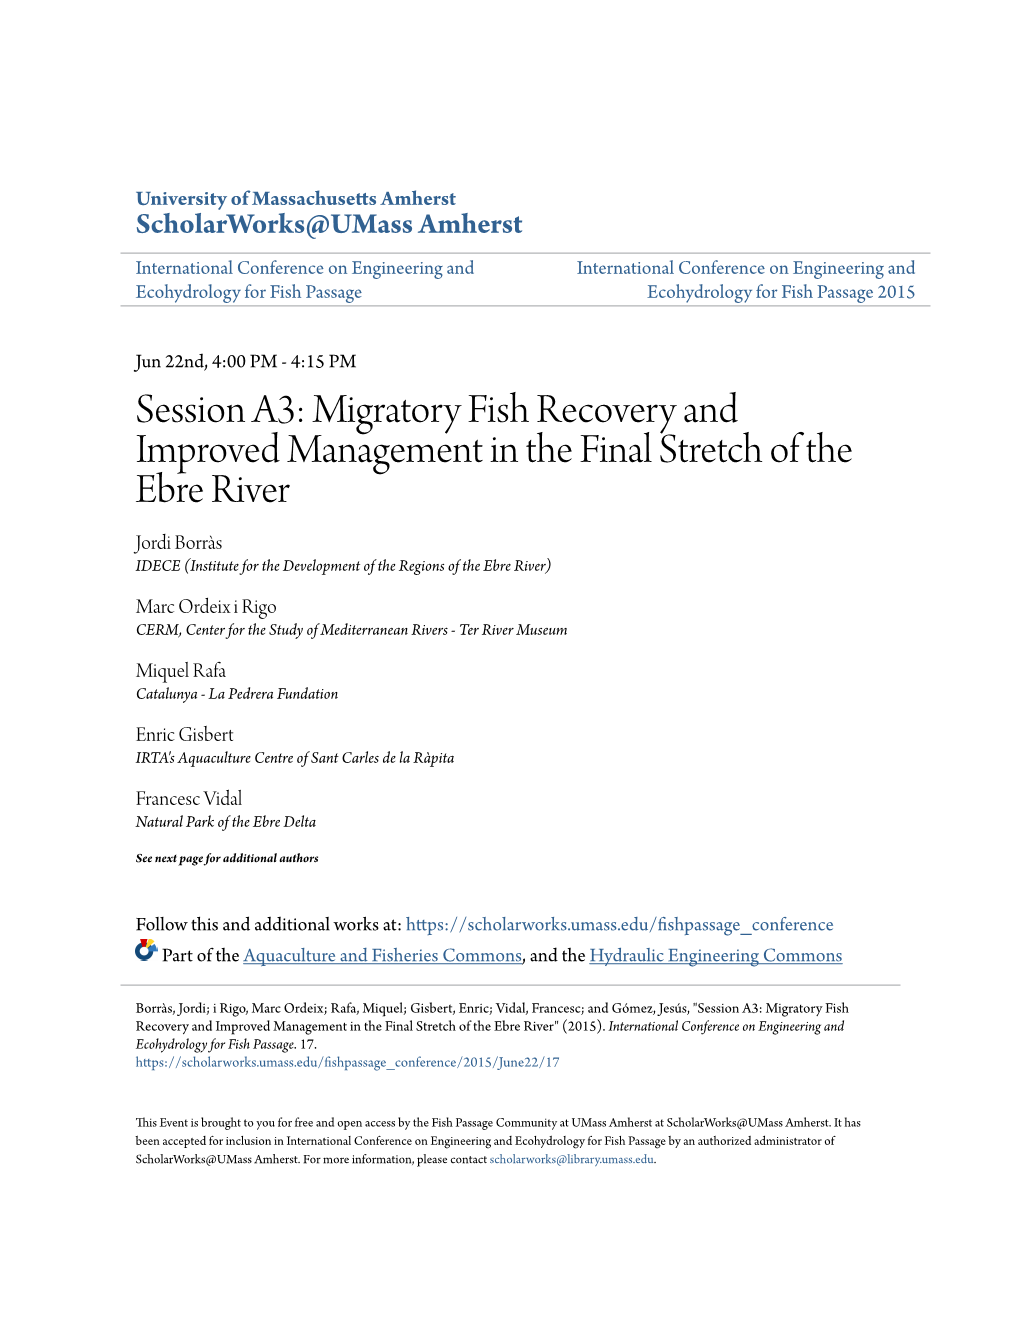 Migratory Fish Recovery and Improved Management in the Final